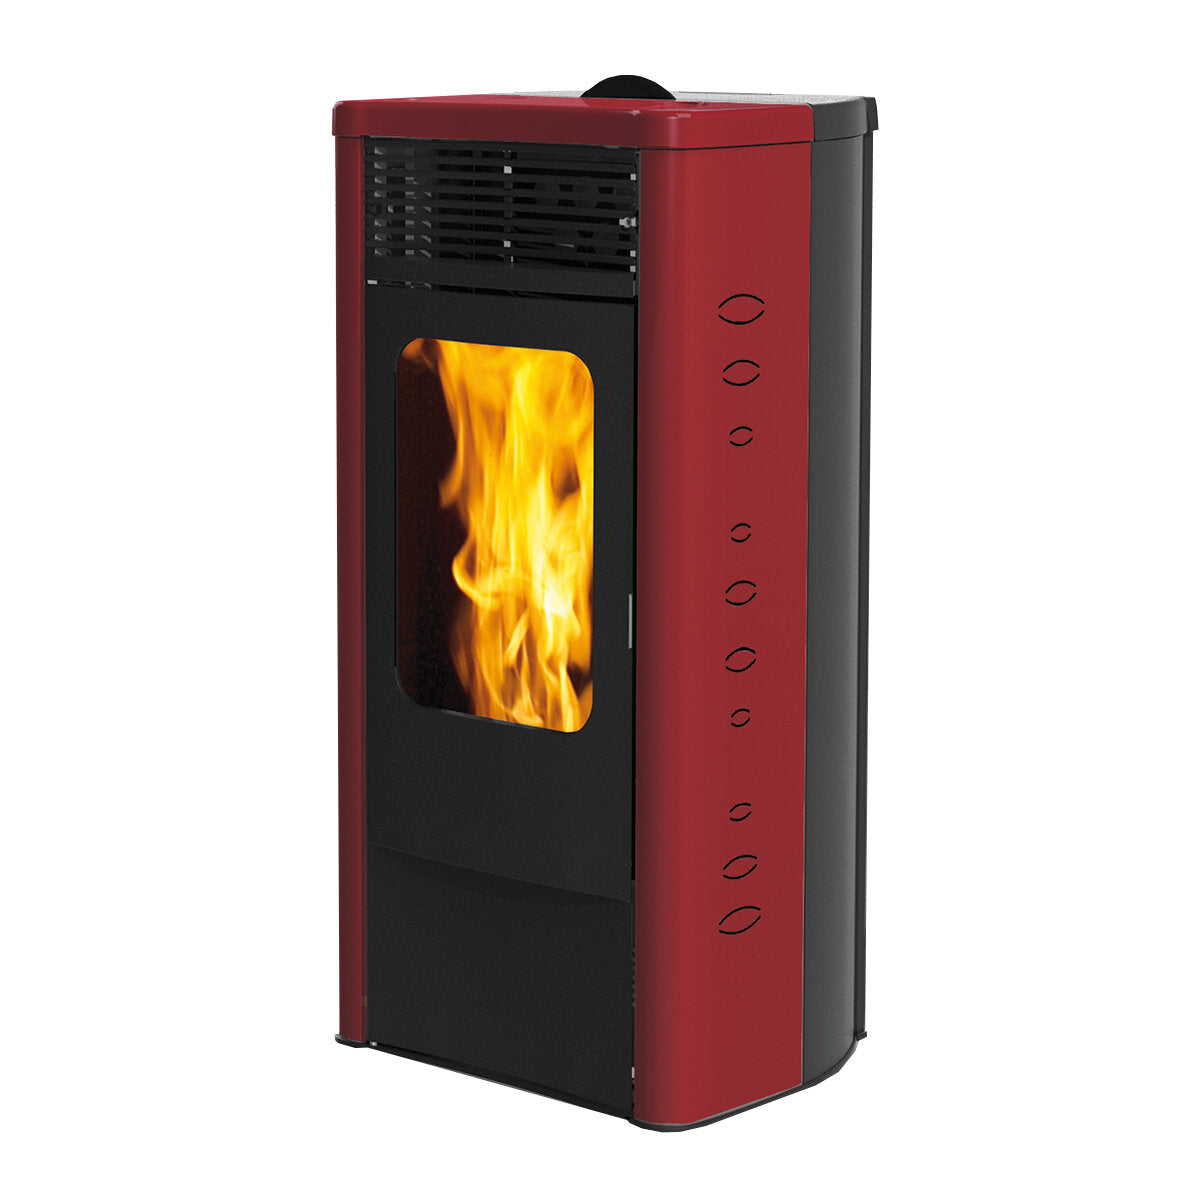 Italiana Camini pellet stove Dida2 Plus 13 kW with ducted air in burgundy